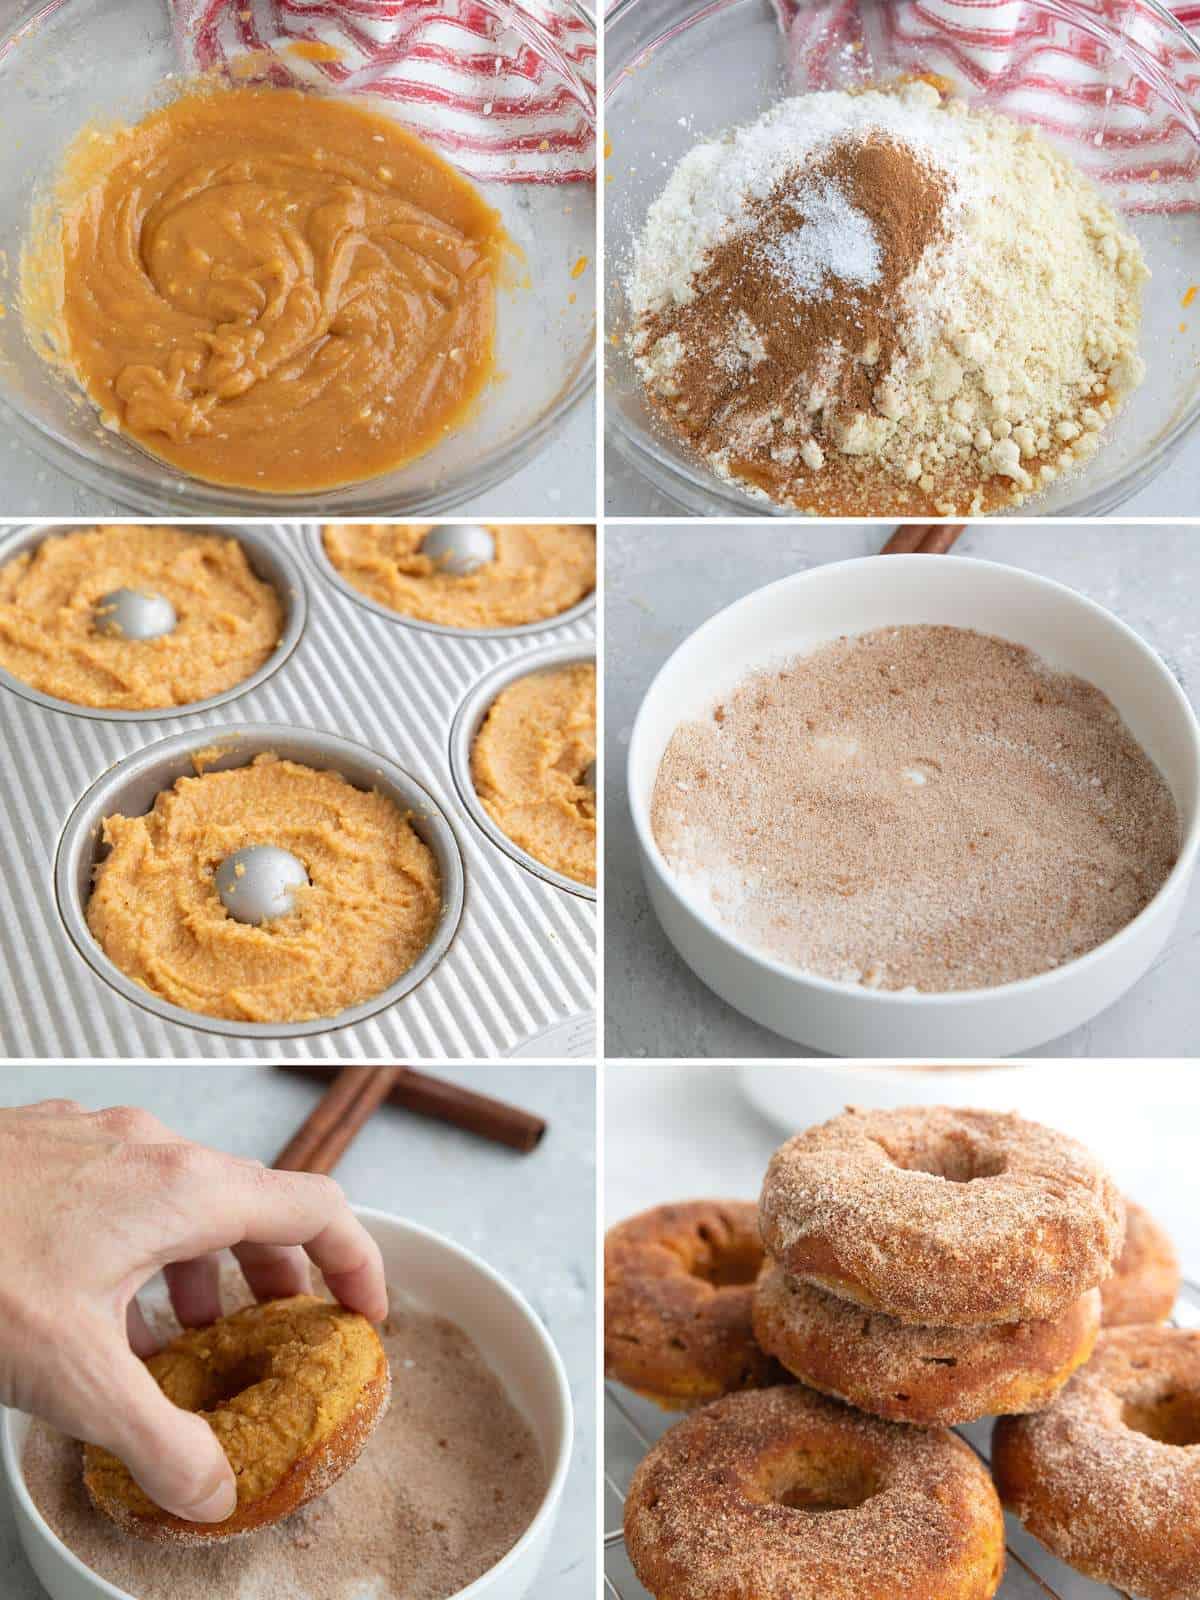 A collage of 6 images showing how to make Keto Pumpkin Donuts.